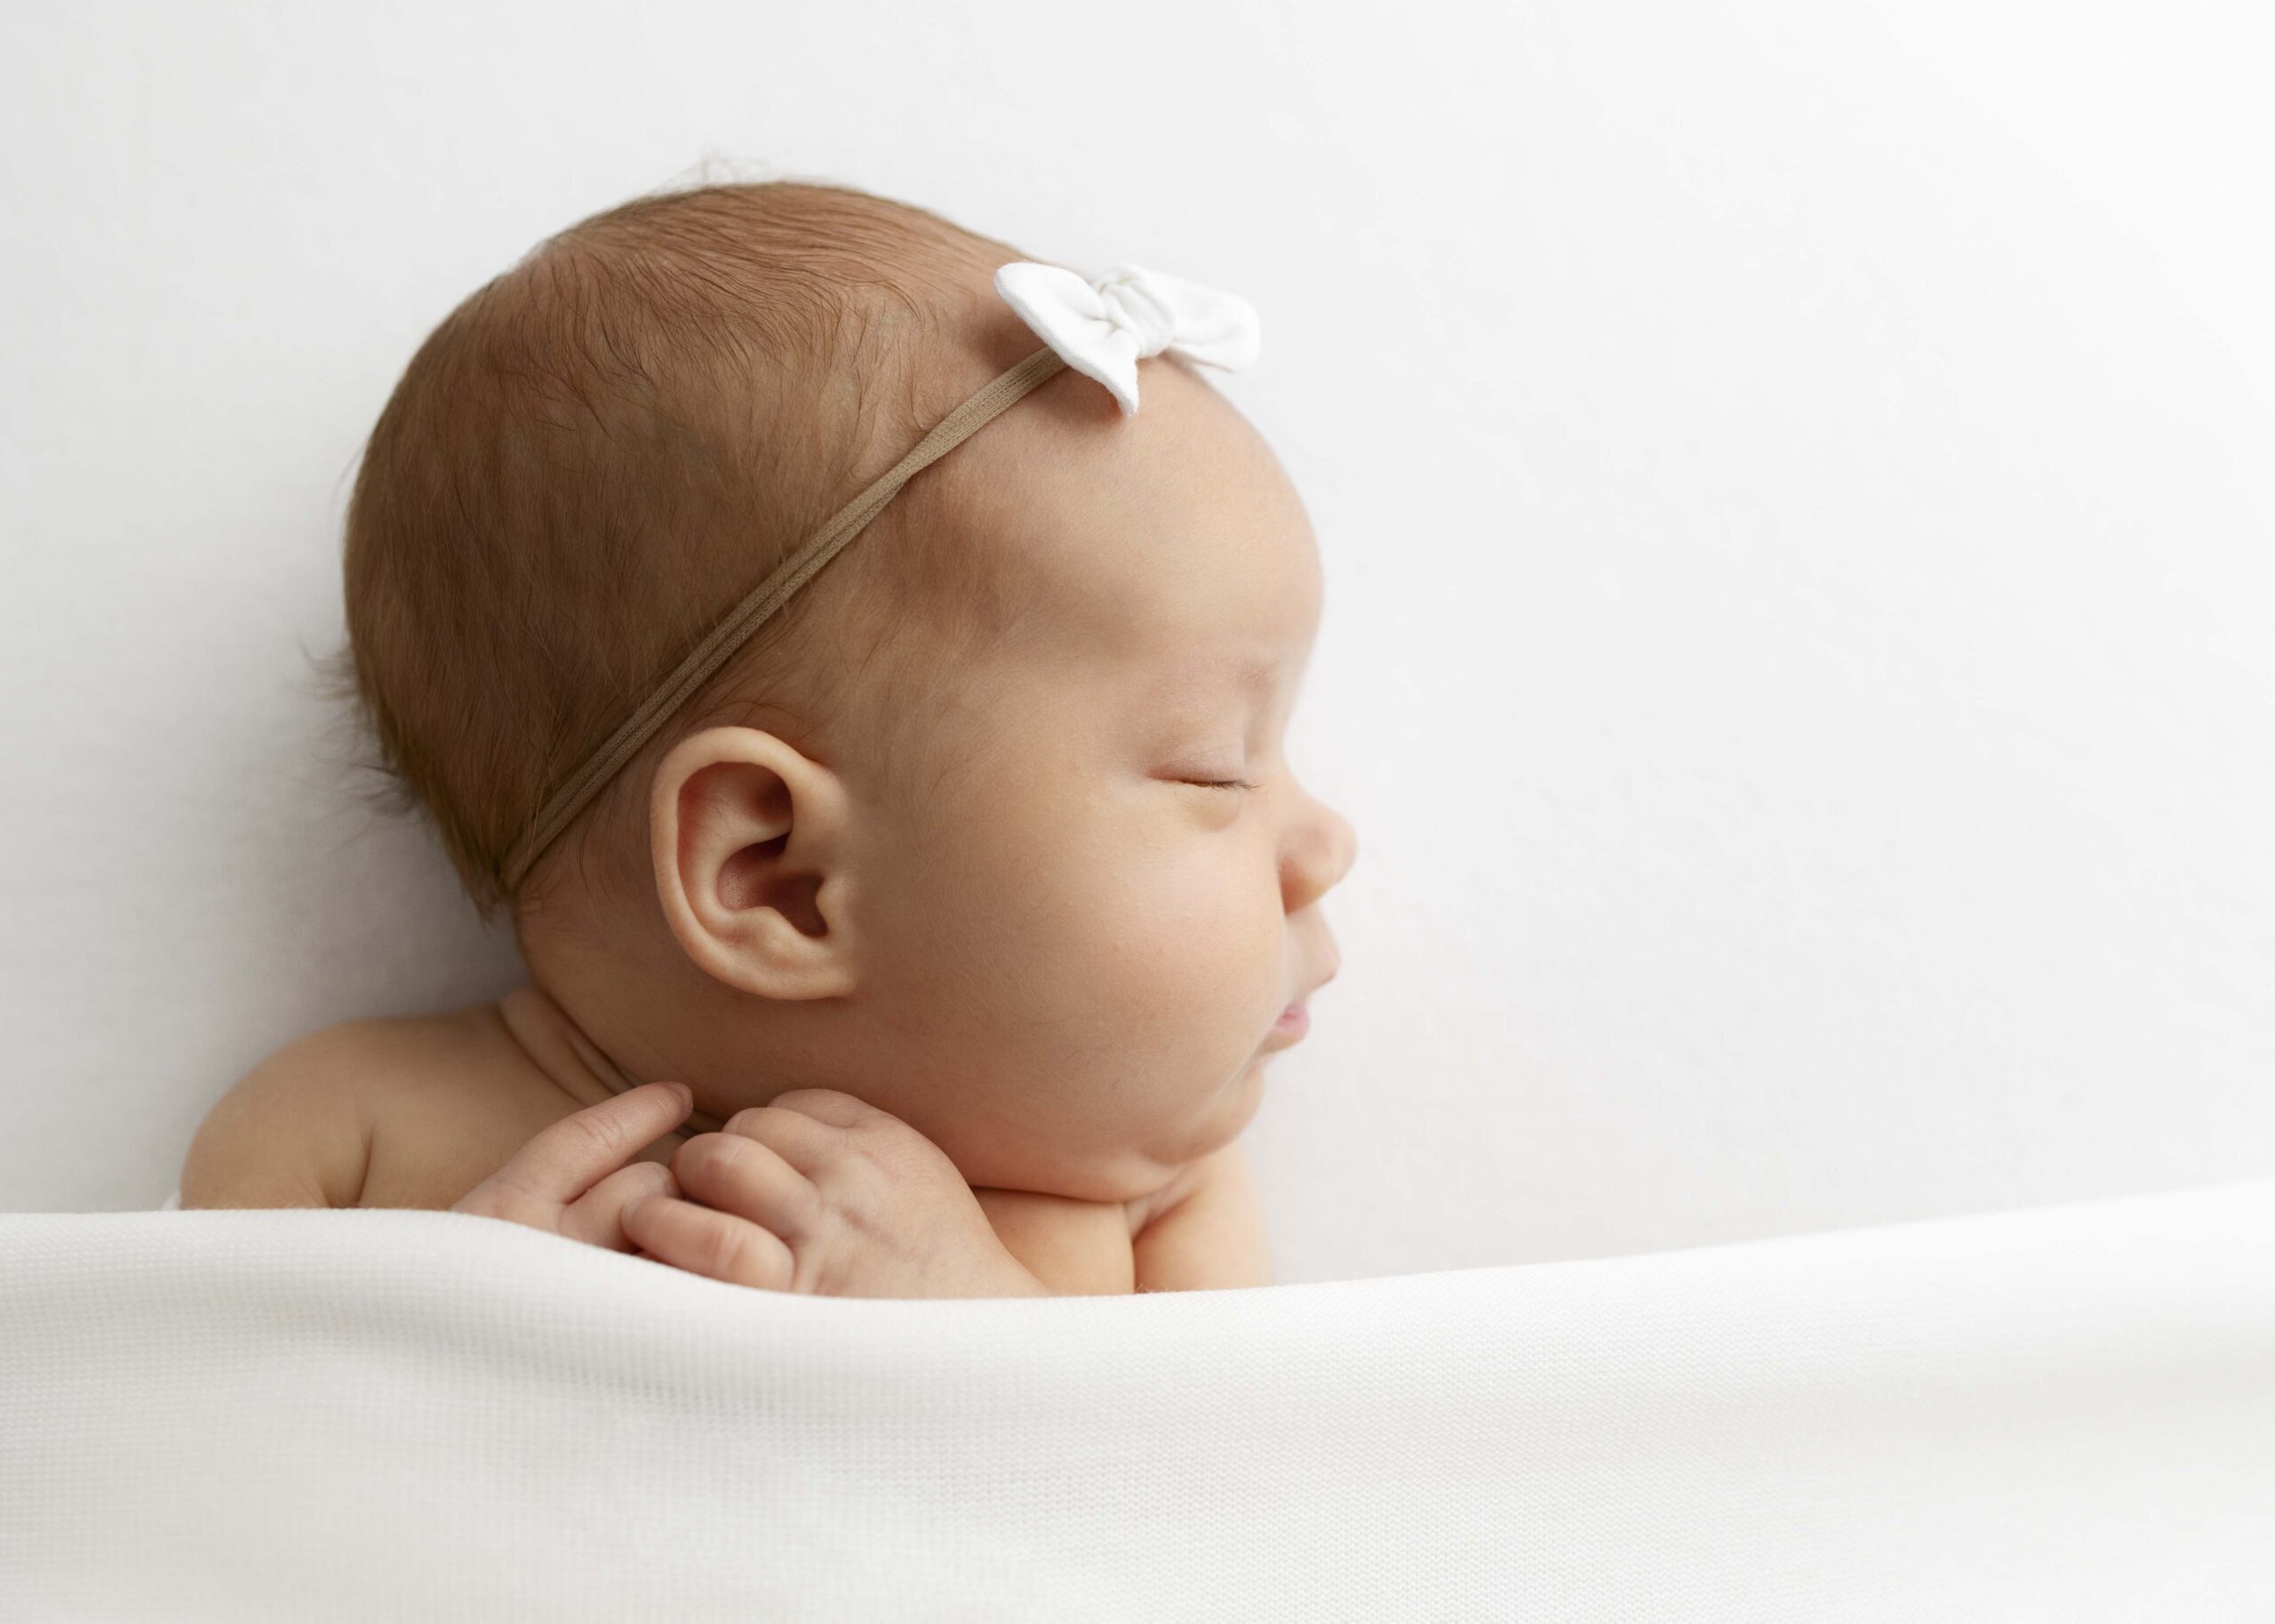 Newborn girl with white bow in hair sleeping